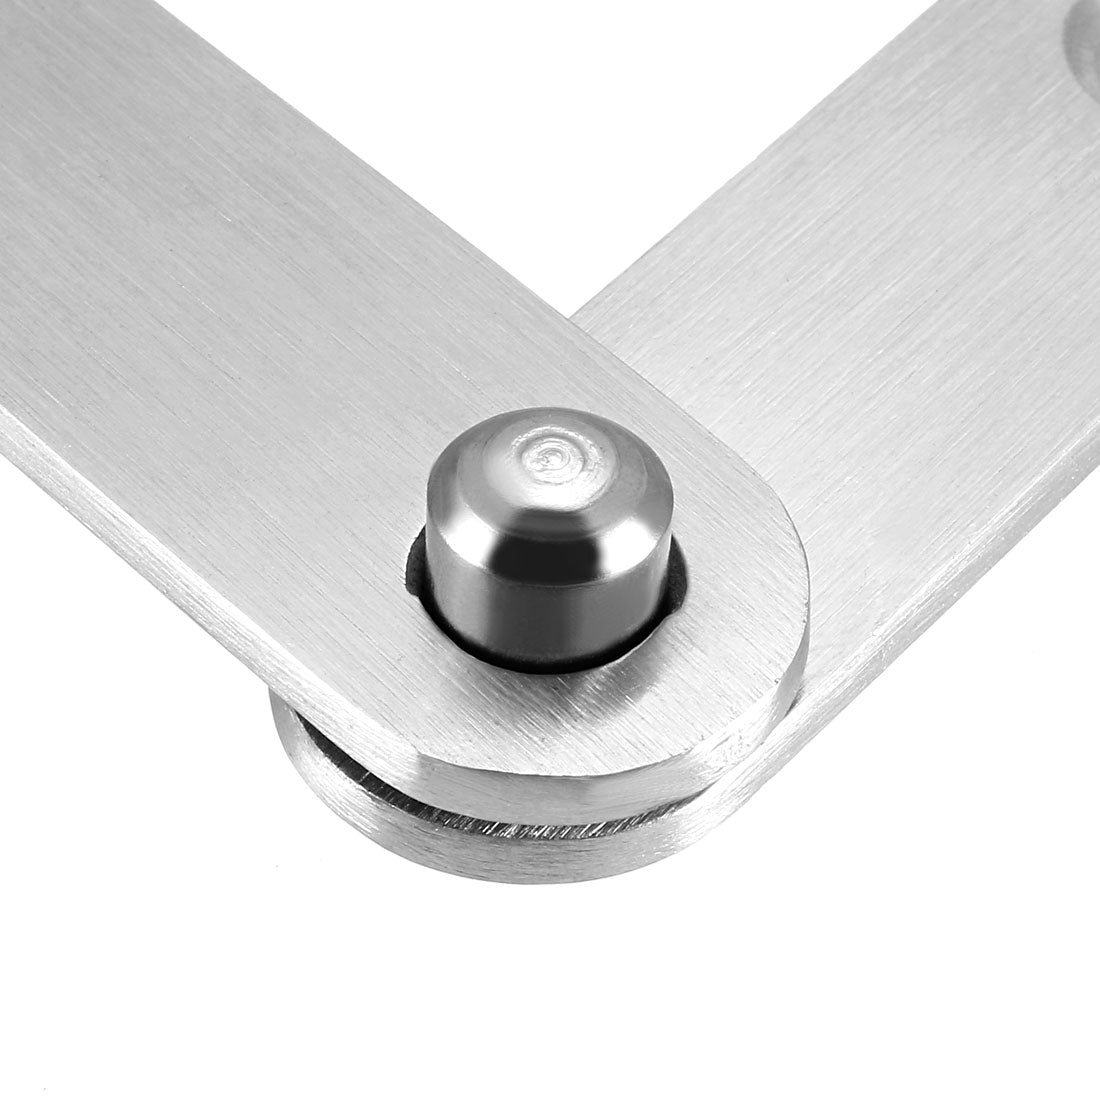 uxcell Uxcell Door Pivot Hinge, 100mmx16mmx11mm Stainless Steel 360 Degree Rotating 2pcs